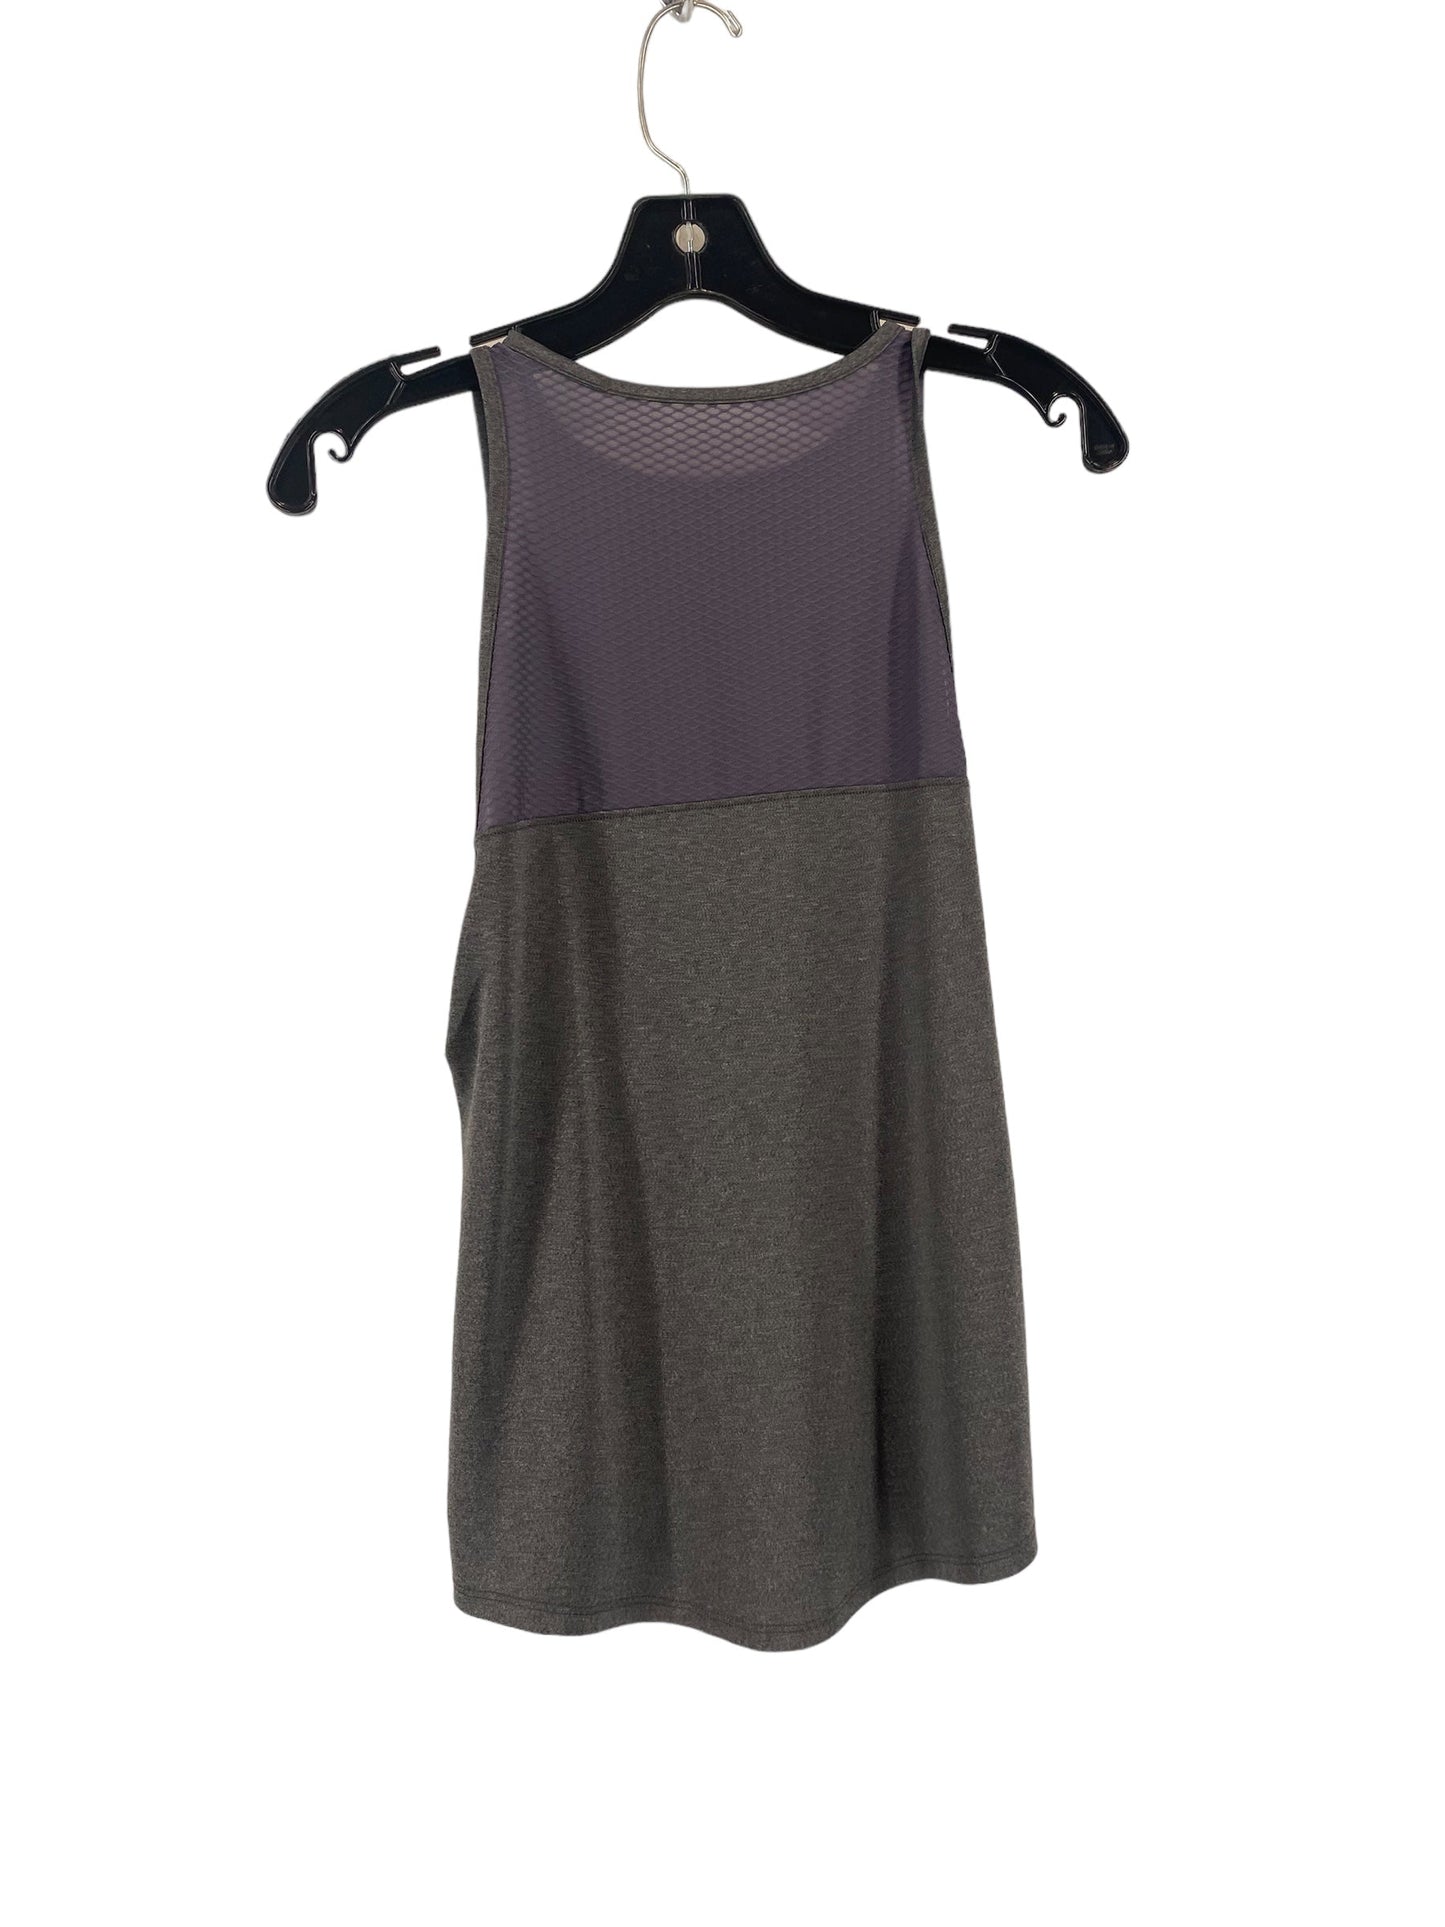 Grey Athletic Tank Top Bcg, Size S